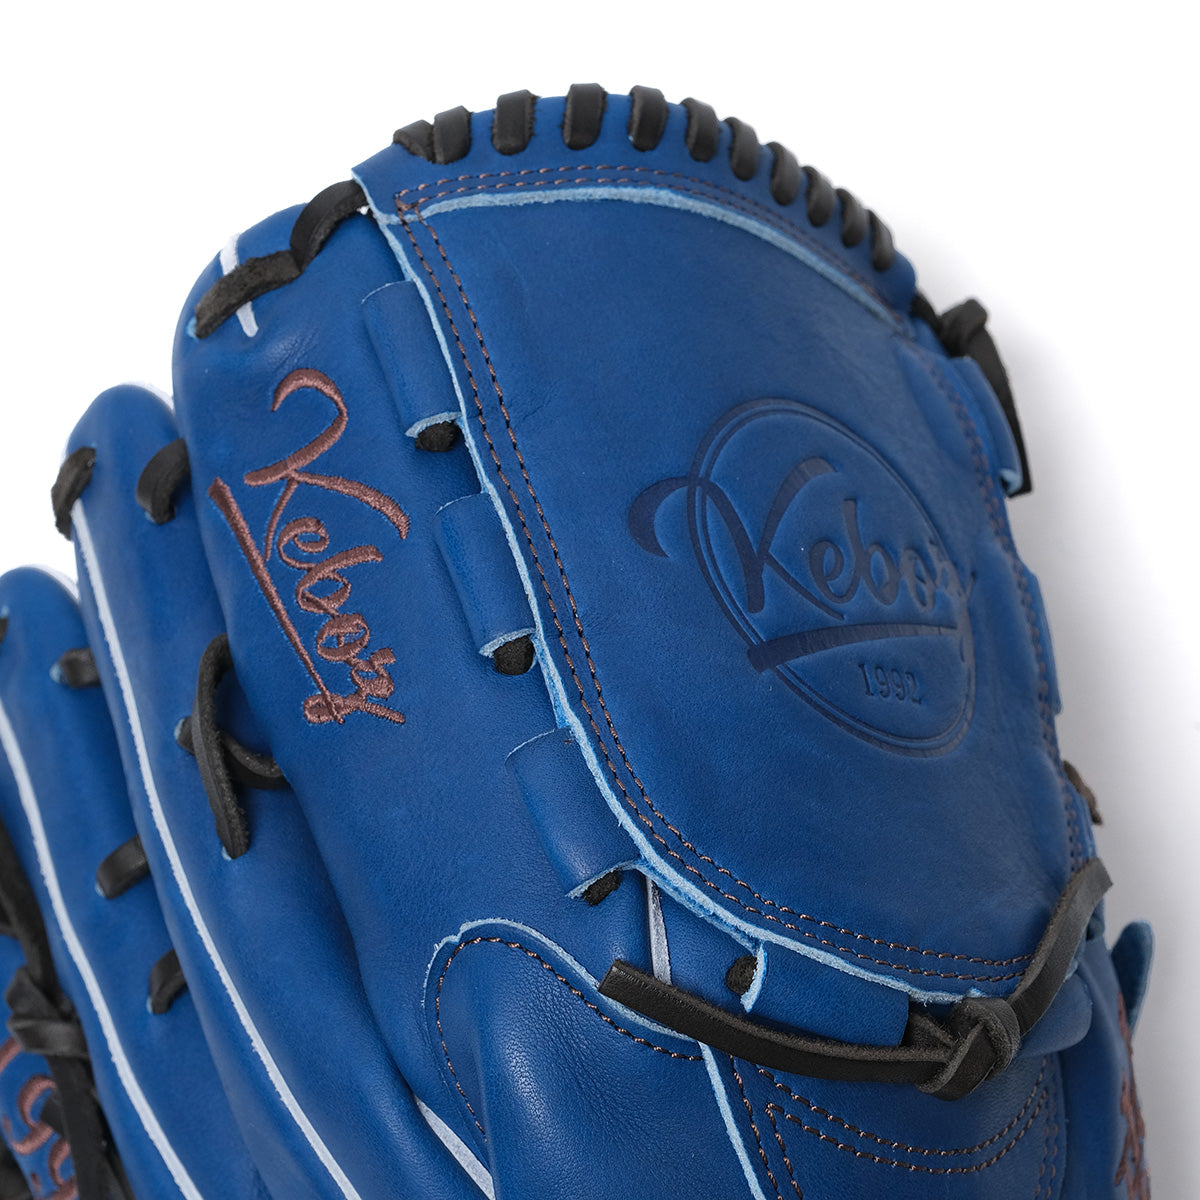 RAWLINGS PITCHER'S GLOVE CUSTOMIZED BY KEBOZ